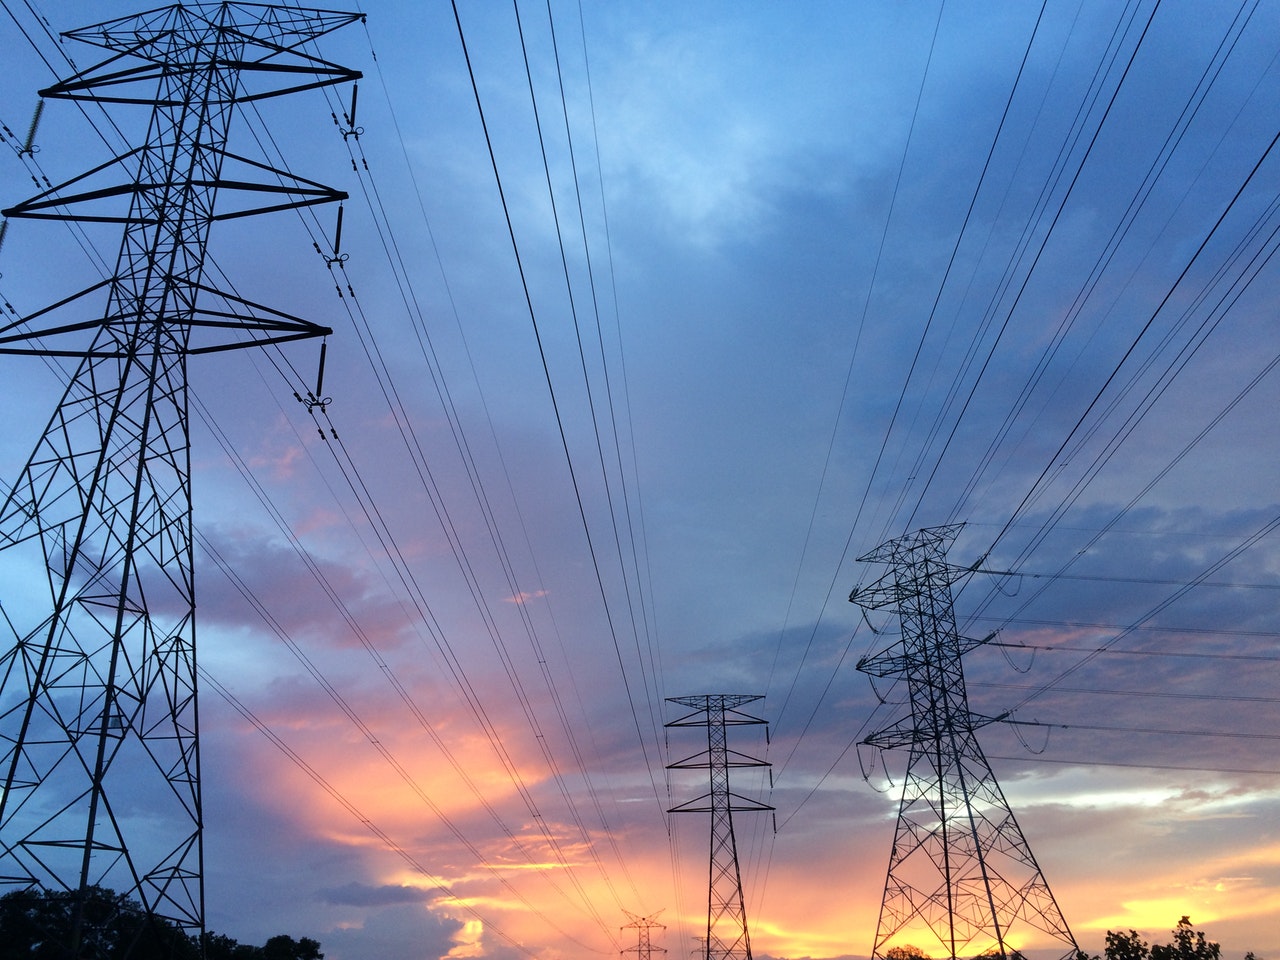 An outdoor image of power lines and electricity towers in the sunrise lit sky.